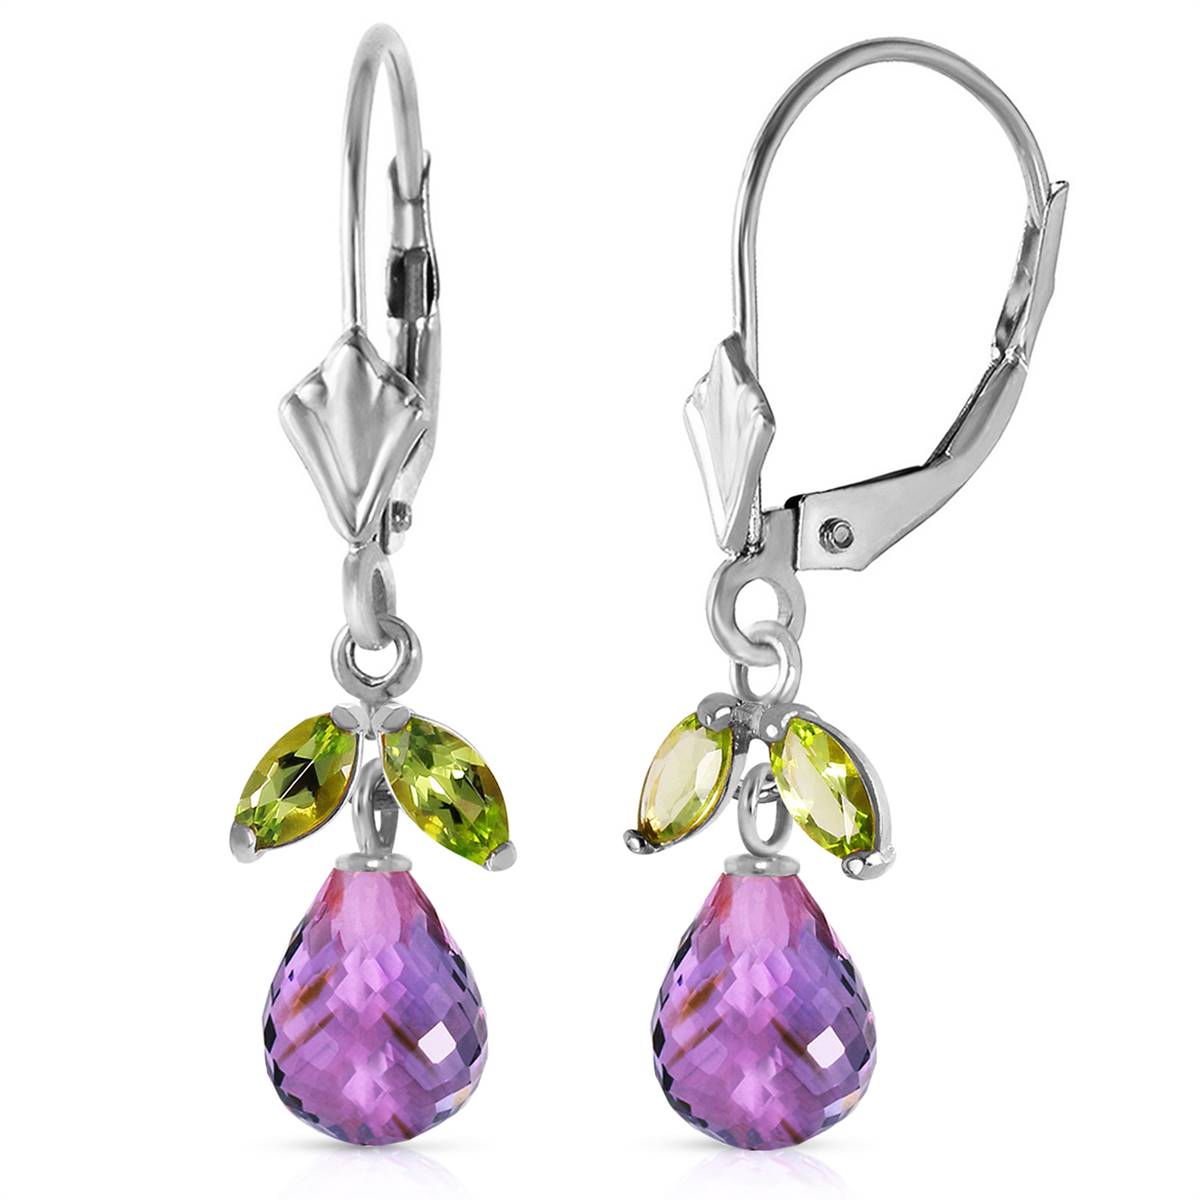 3.4 Carat 14K Solid White Gold Raise Your Voice Amethyst Peridot Earrings